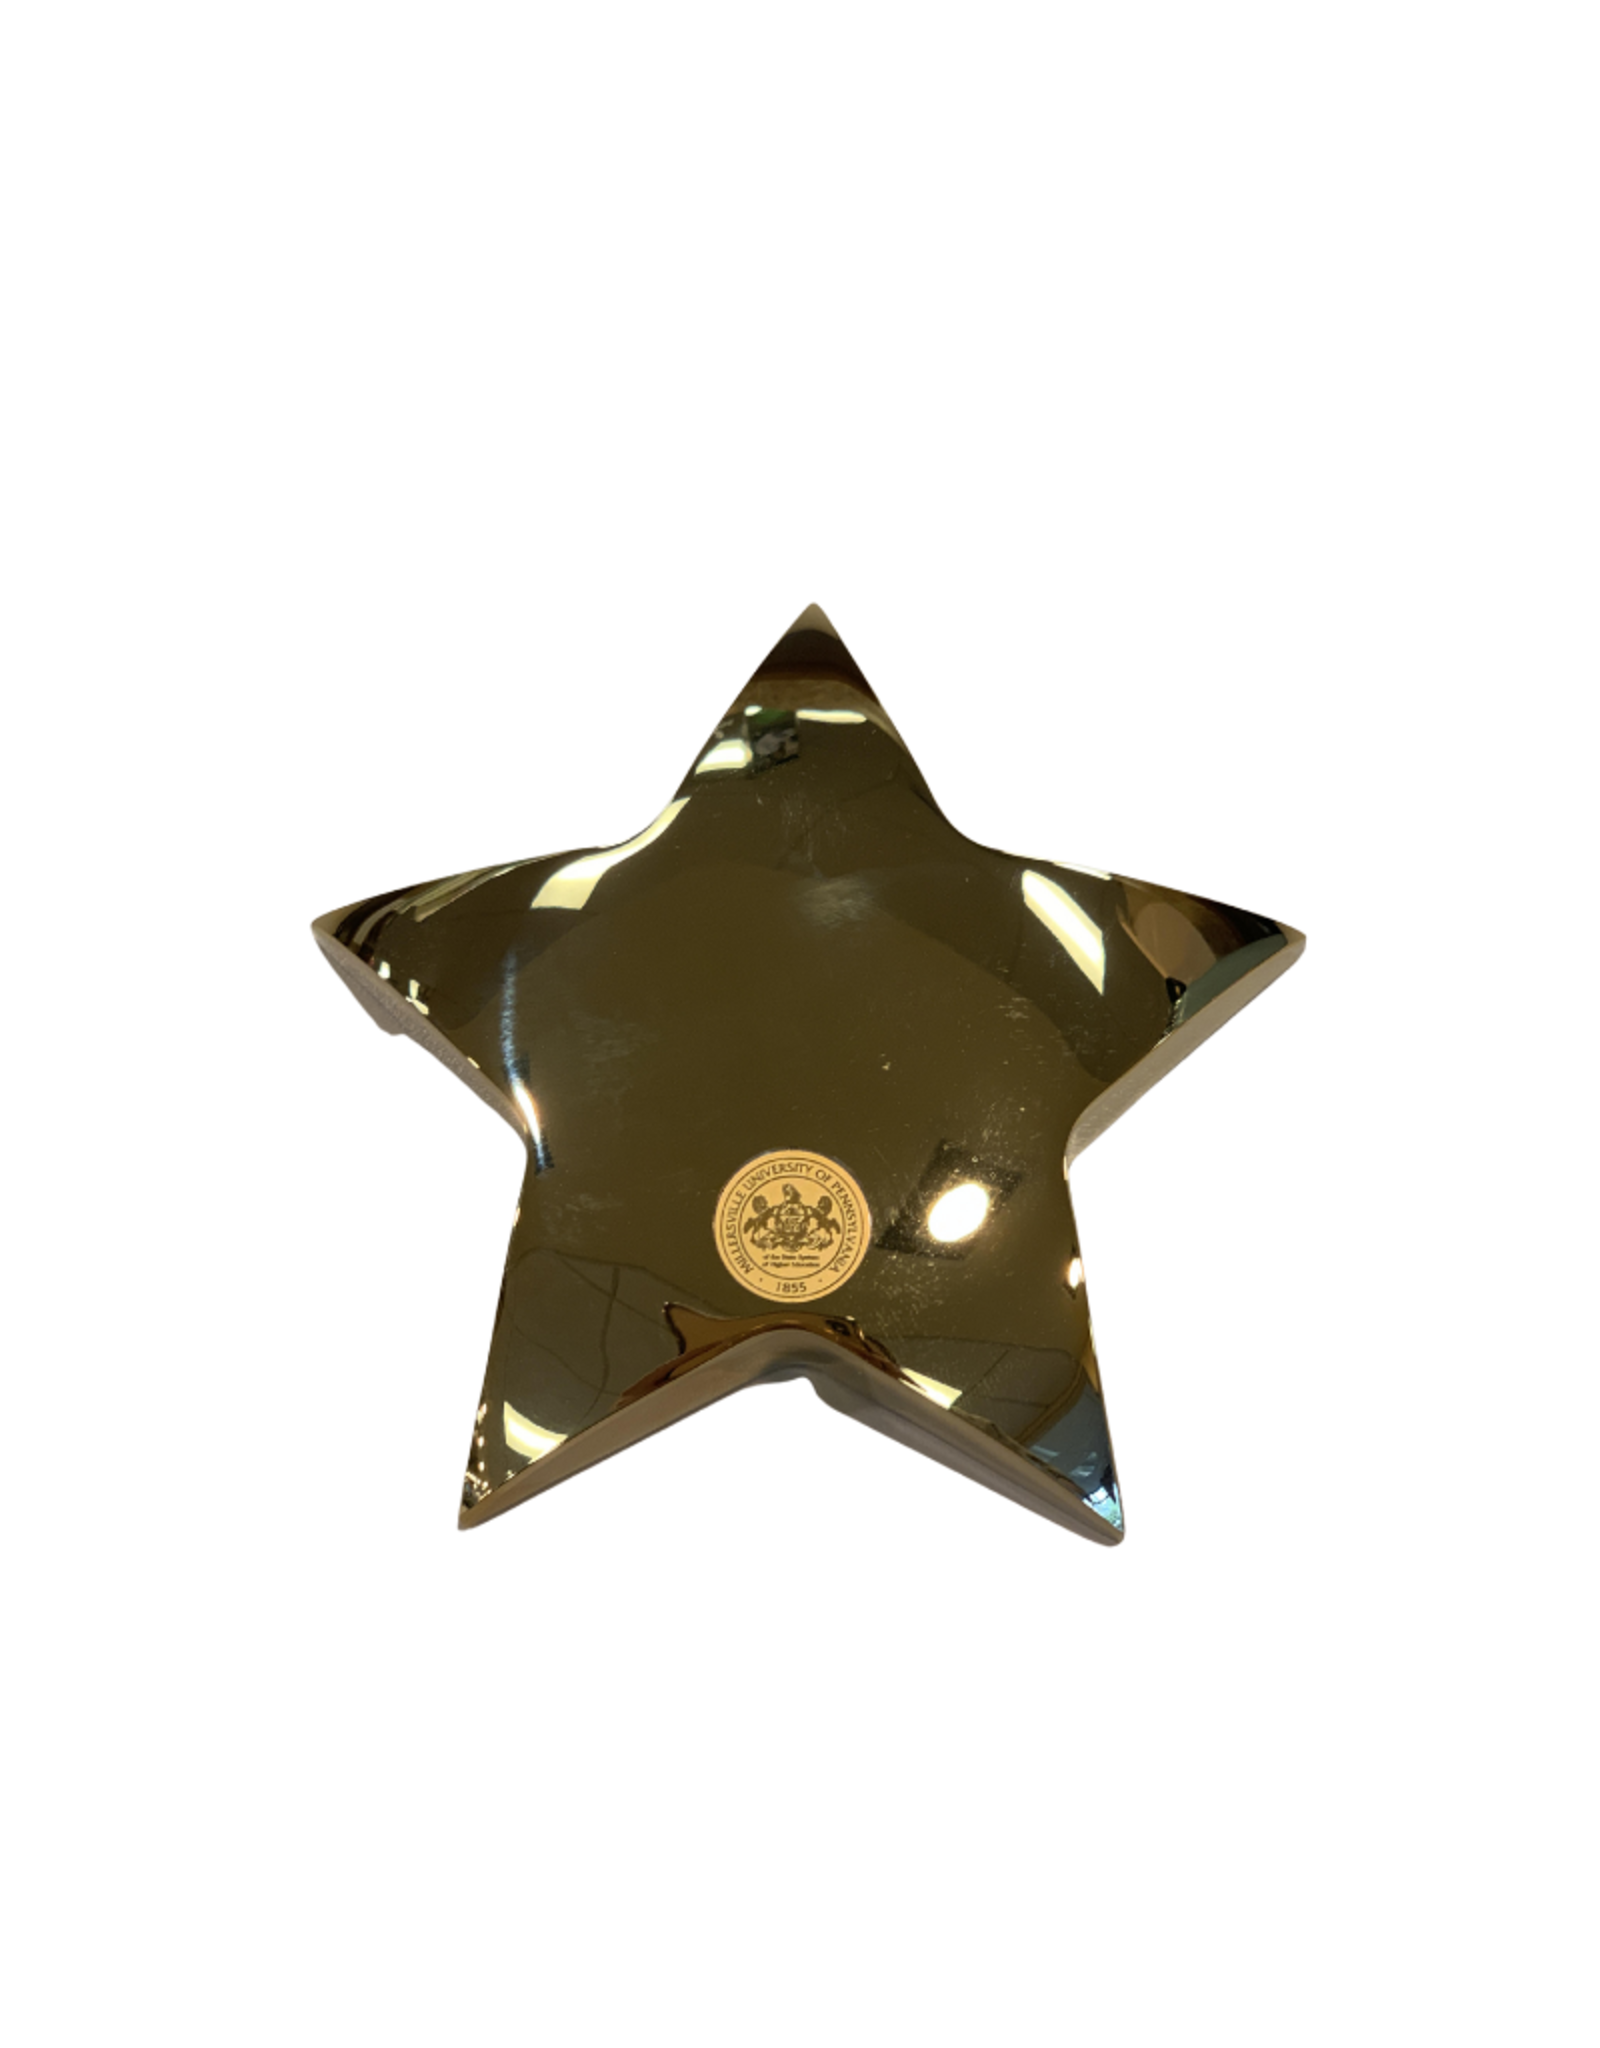 Gold Star Paperweight